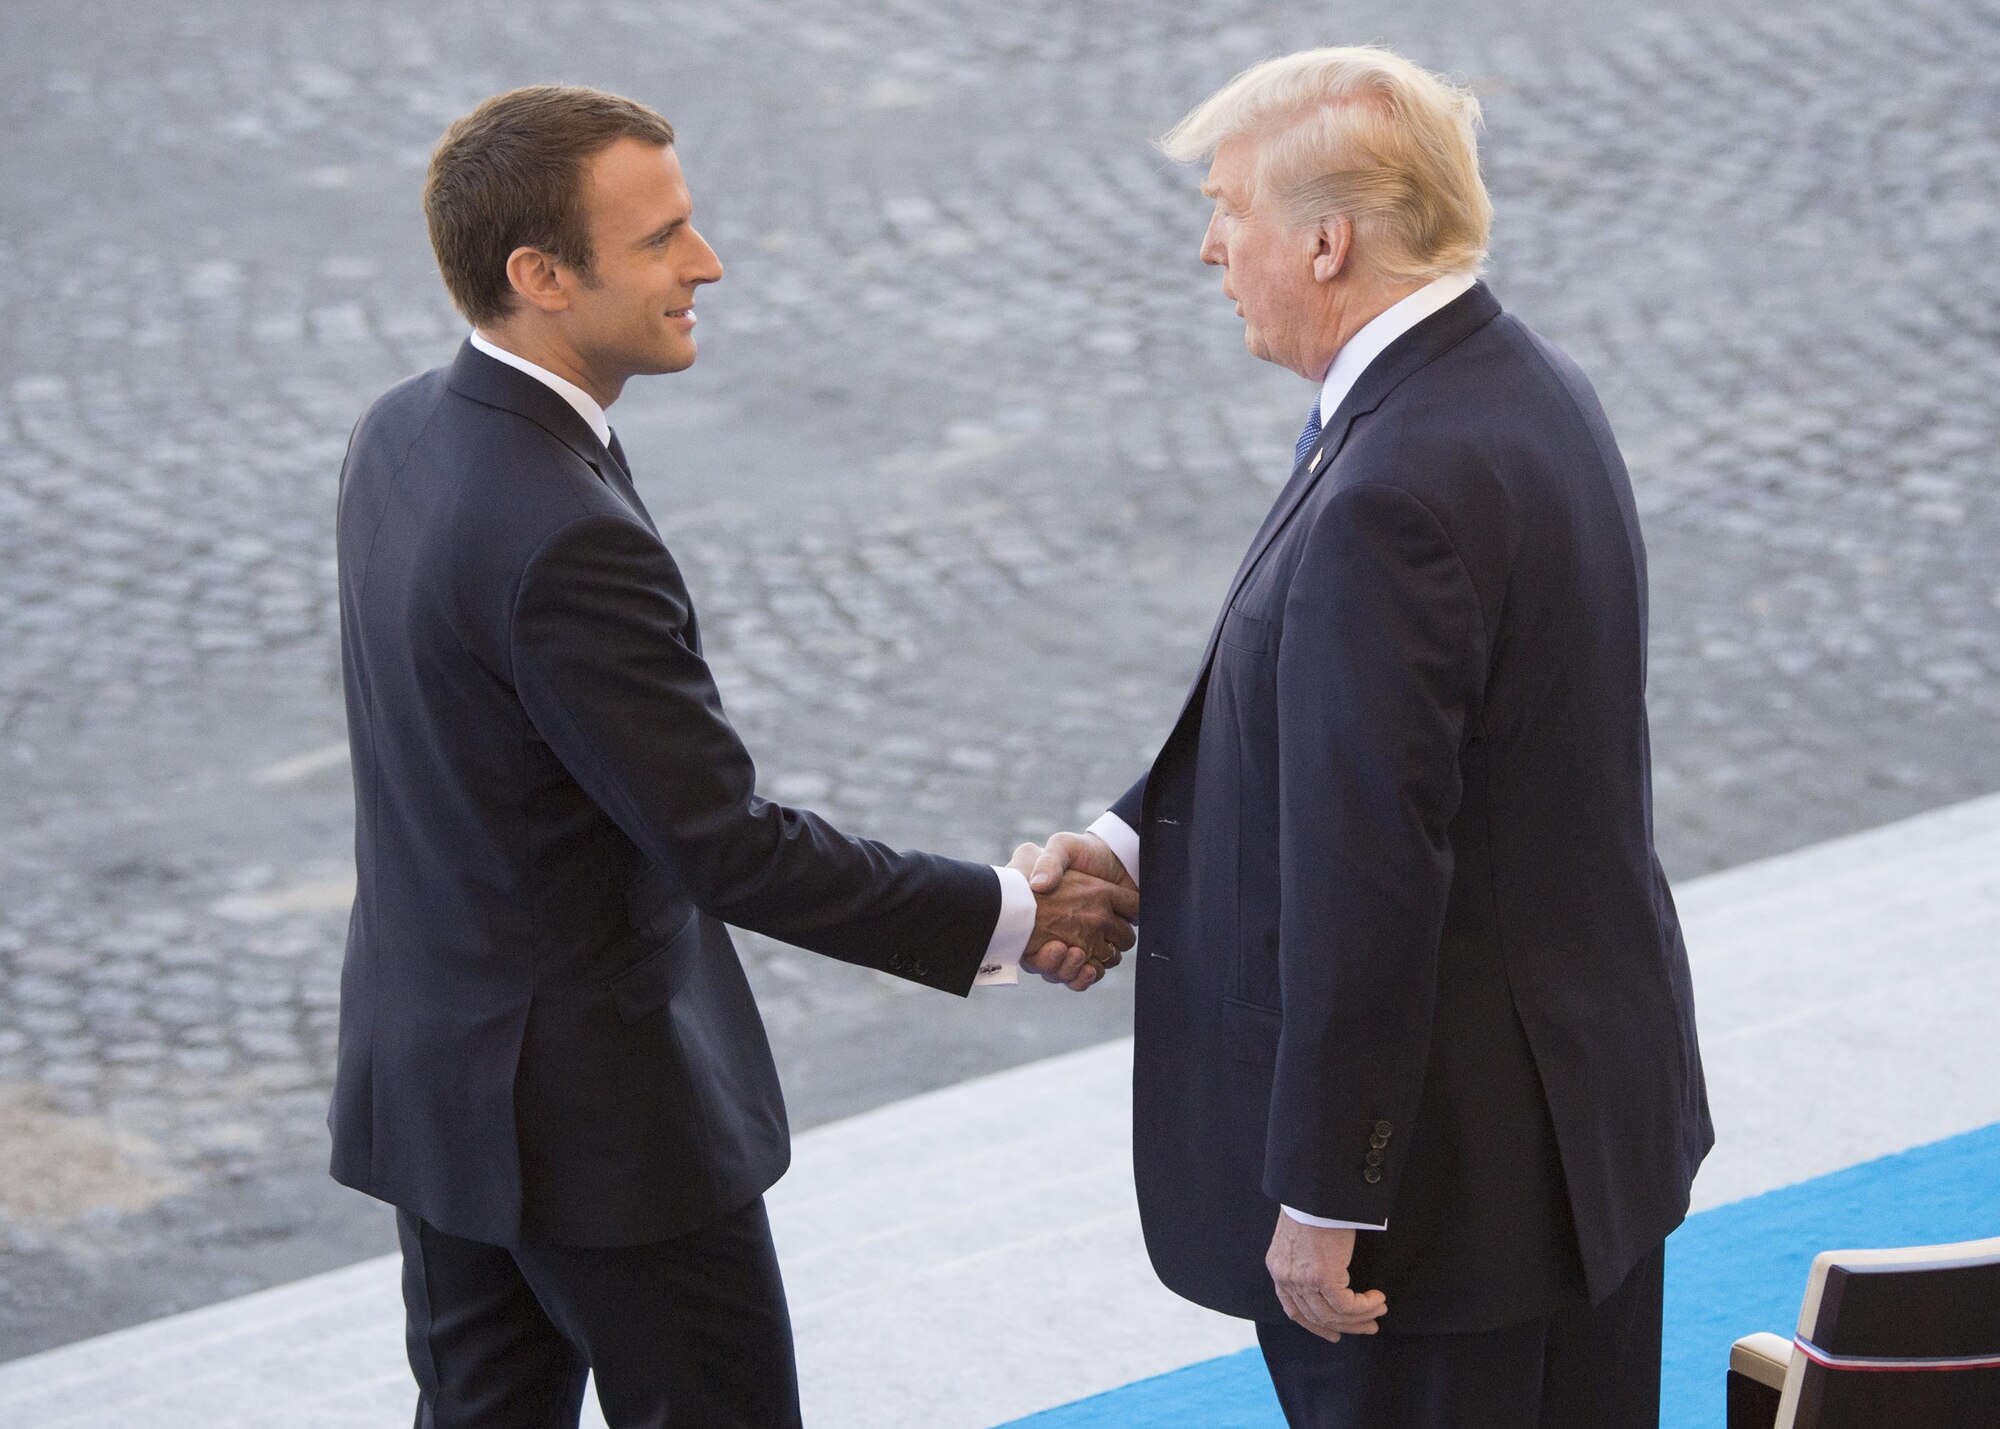 French President Emmanuel Macron welcomes President Donald J. Trump to the reviewing stand for the Bastille Day military parade in Paris, July 14, 2017. Macron and Trump recognized the continuing strength of the U.S.-France alliance from World War I to today.